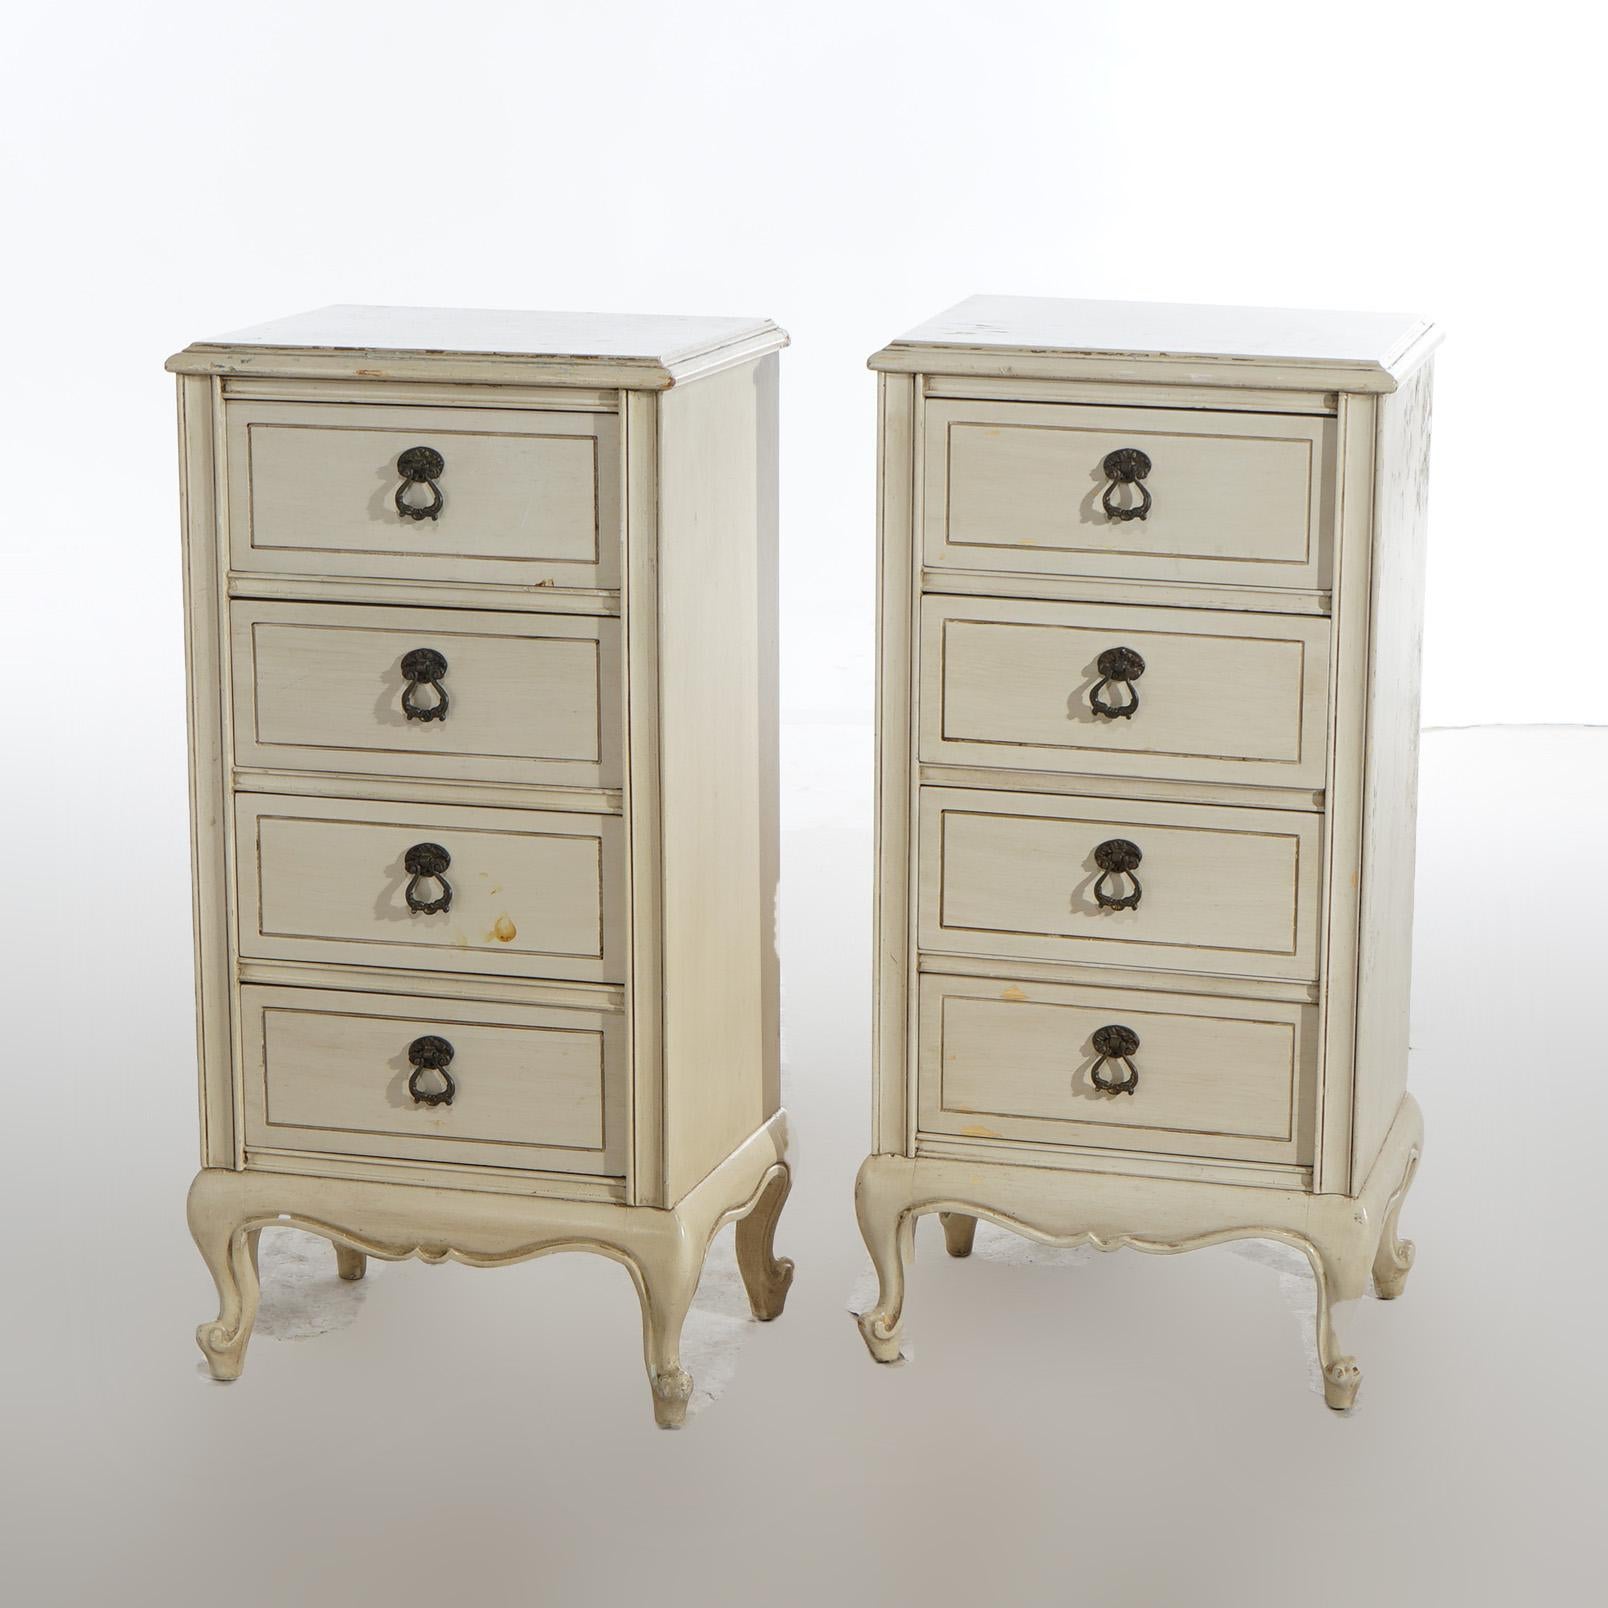 A Pair of French Provincial Style Four Drawer Side Cabinets on Cabriole Legs, 20th C

Measures- 28.25''H x 13.75''W x 10.25''D